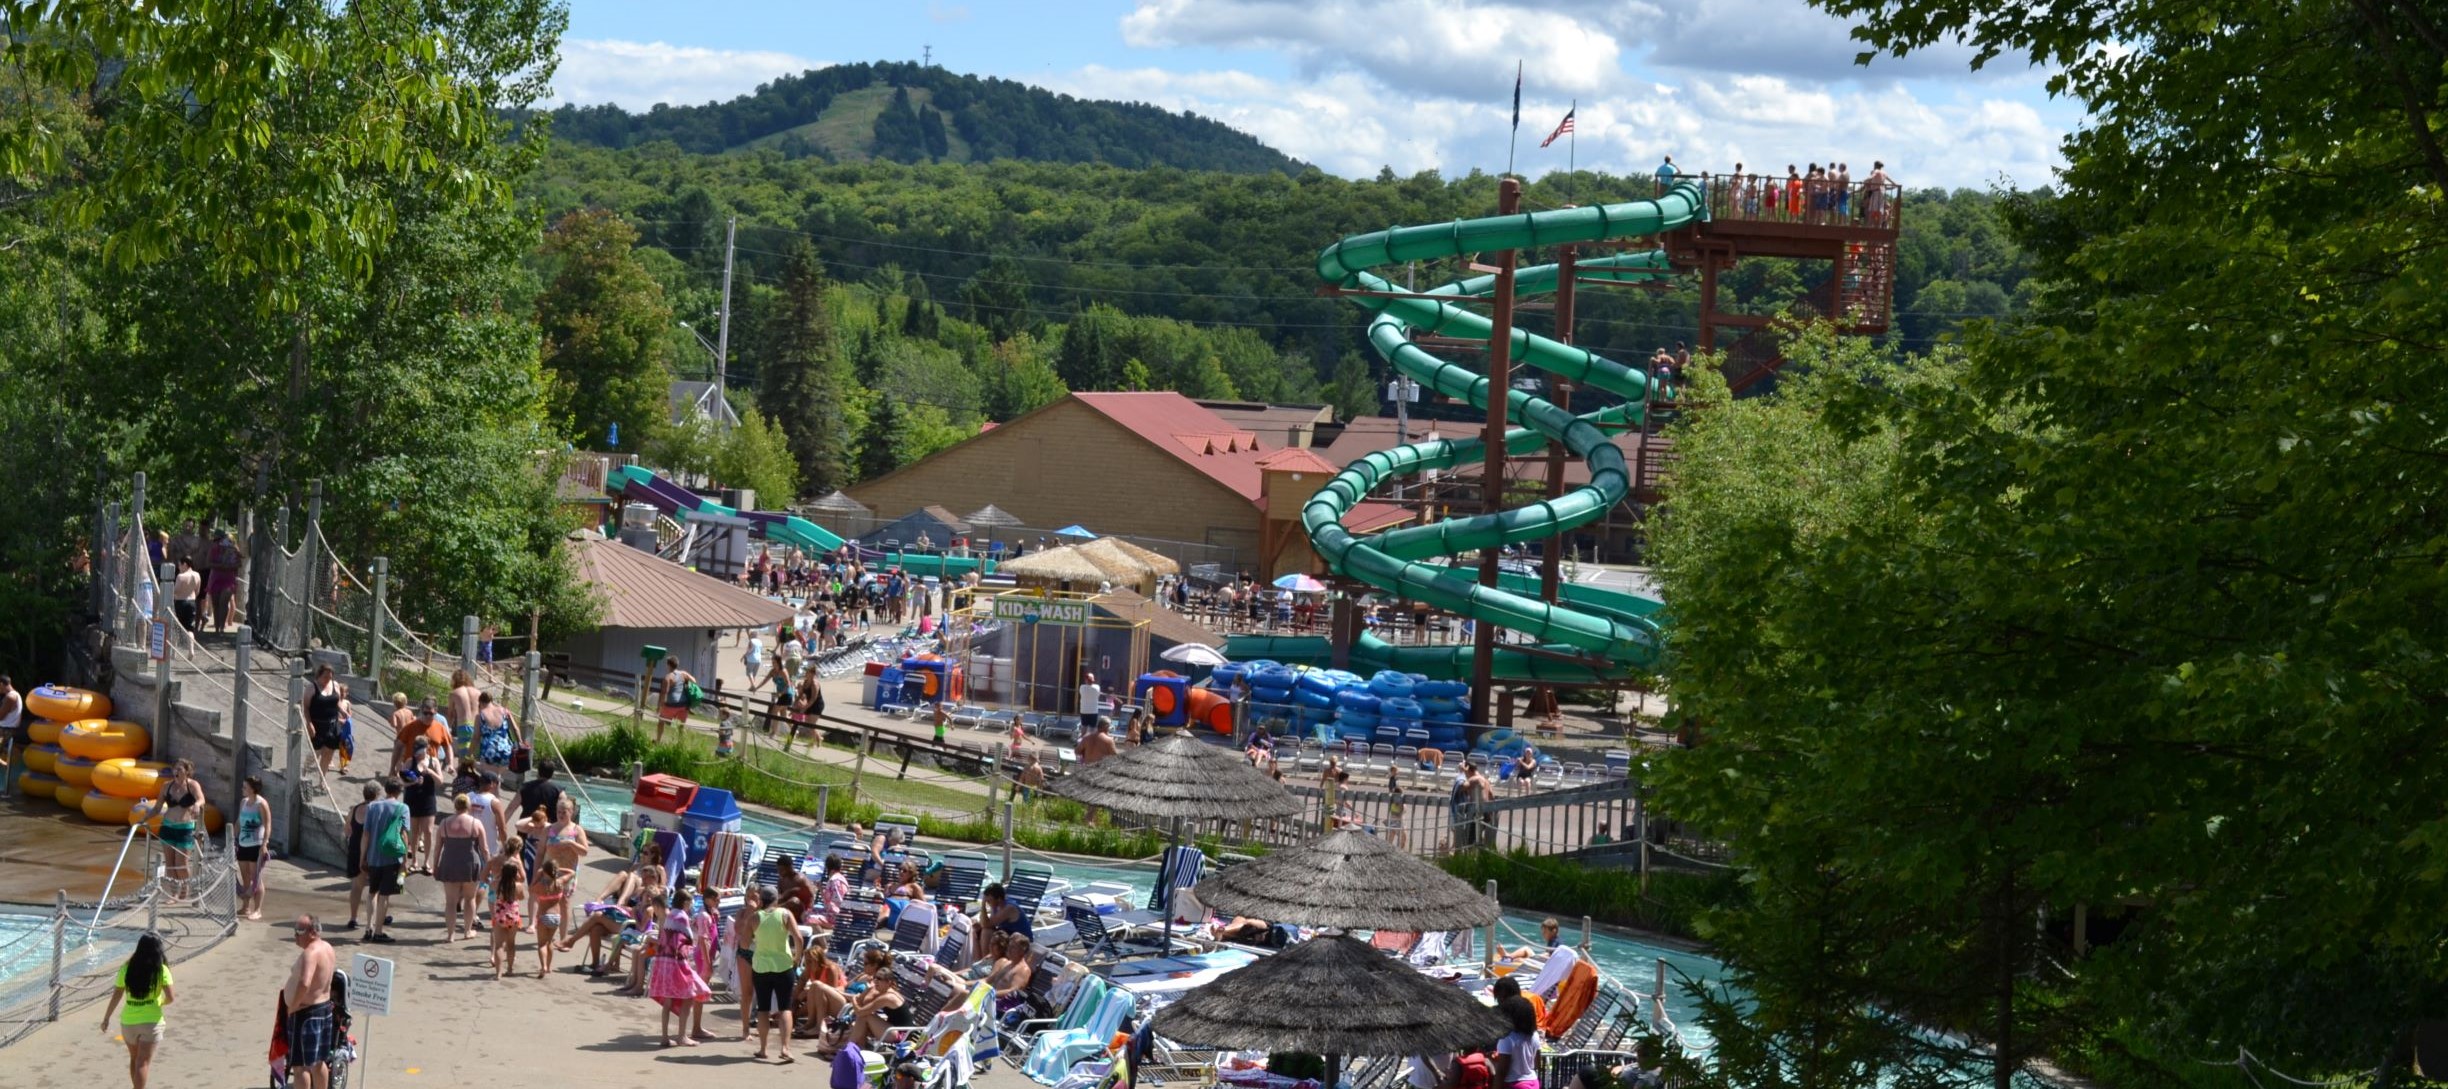 Enchanted Forest Water Safari Ranked in Top 5 Water Parks in the US